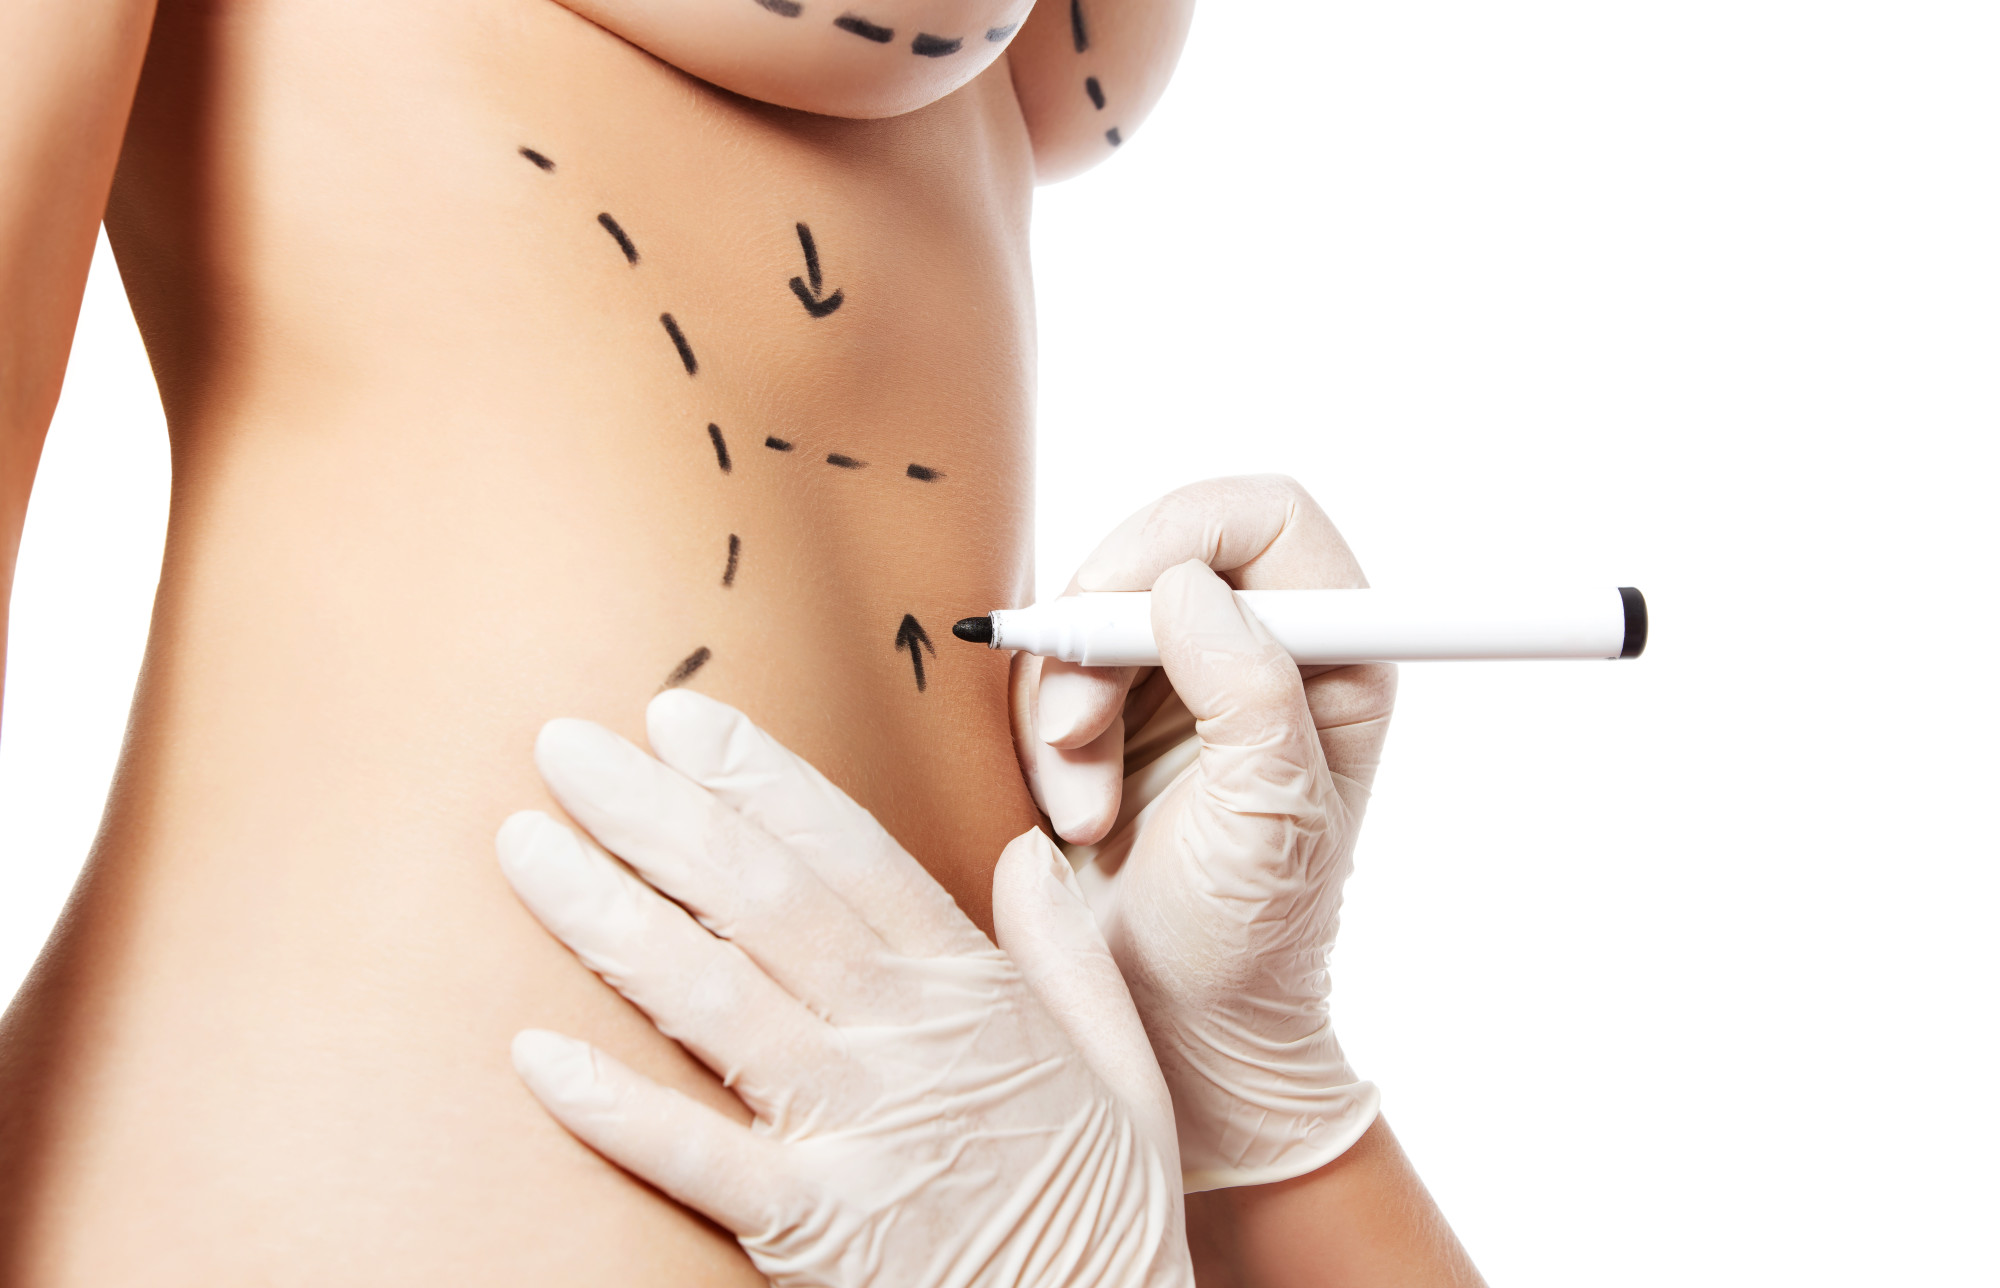 A Rejuvenated You: Is Cosmetic Surgery Right for You?